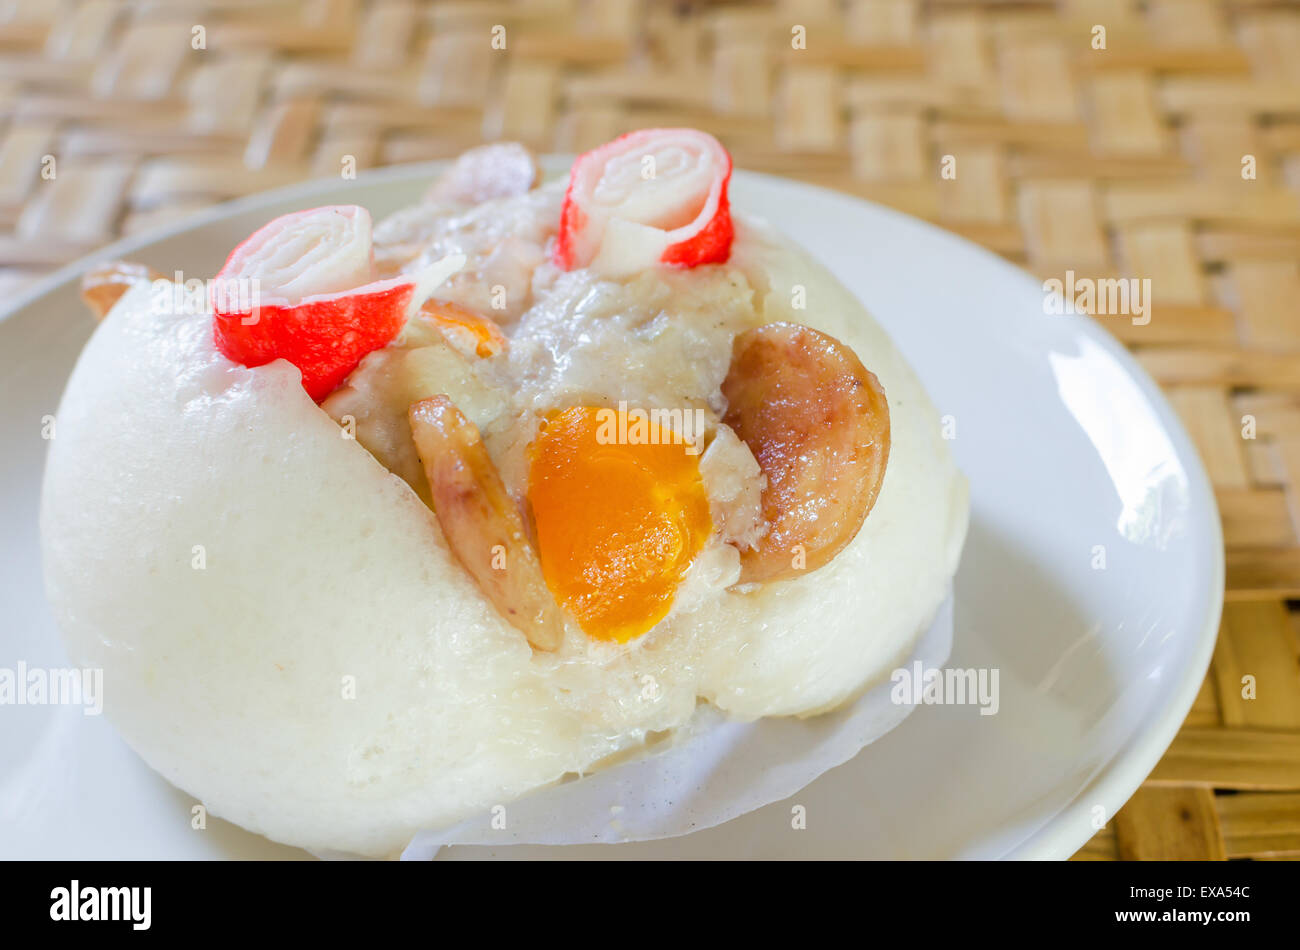 Chinese steamed bun stuffed with  pork,sausage,egg yolk and crab. Stock Photo